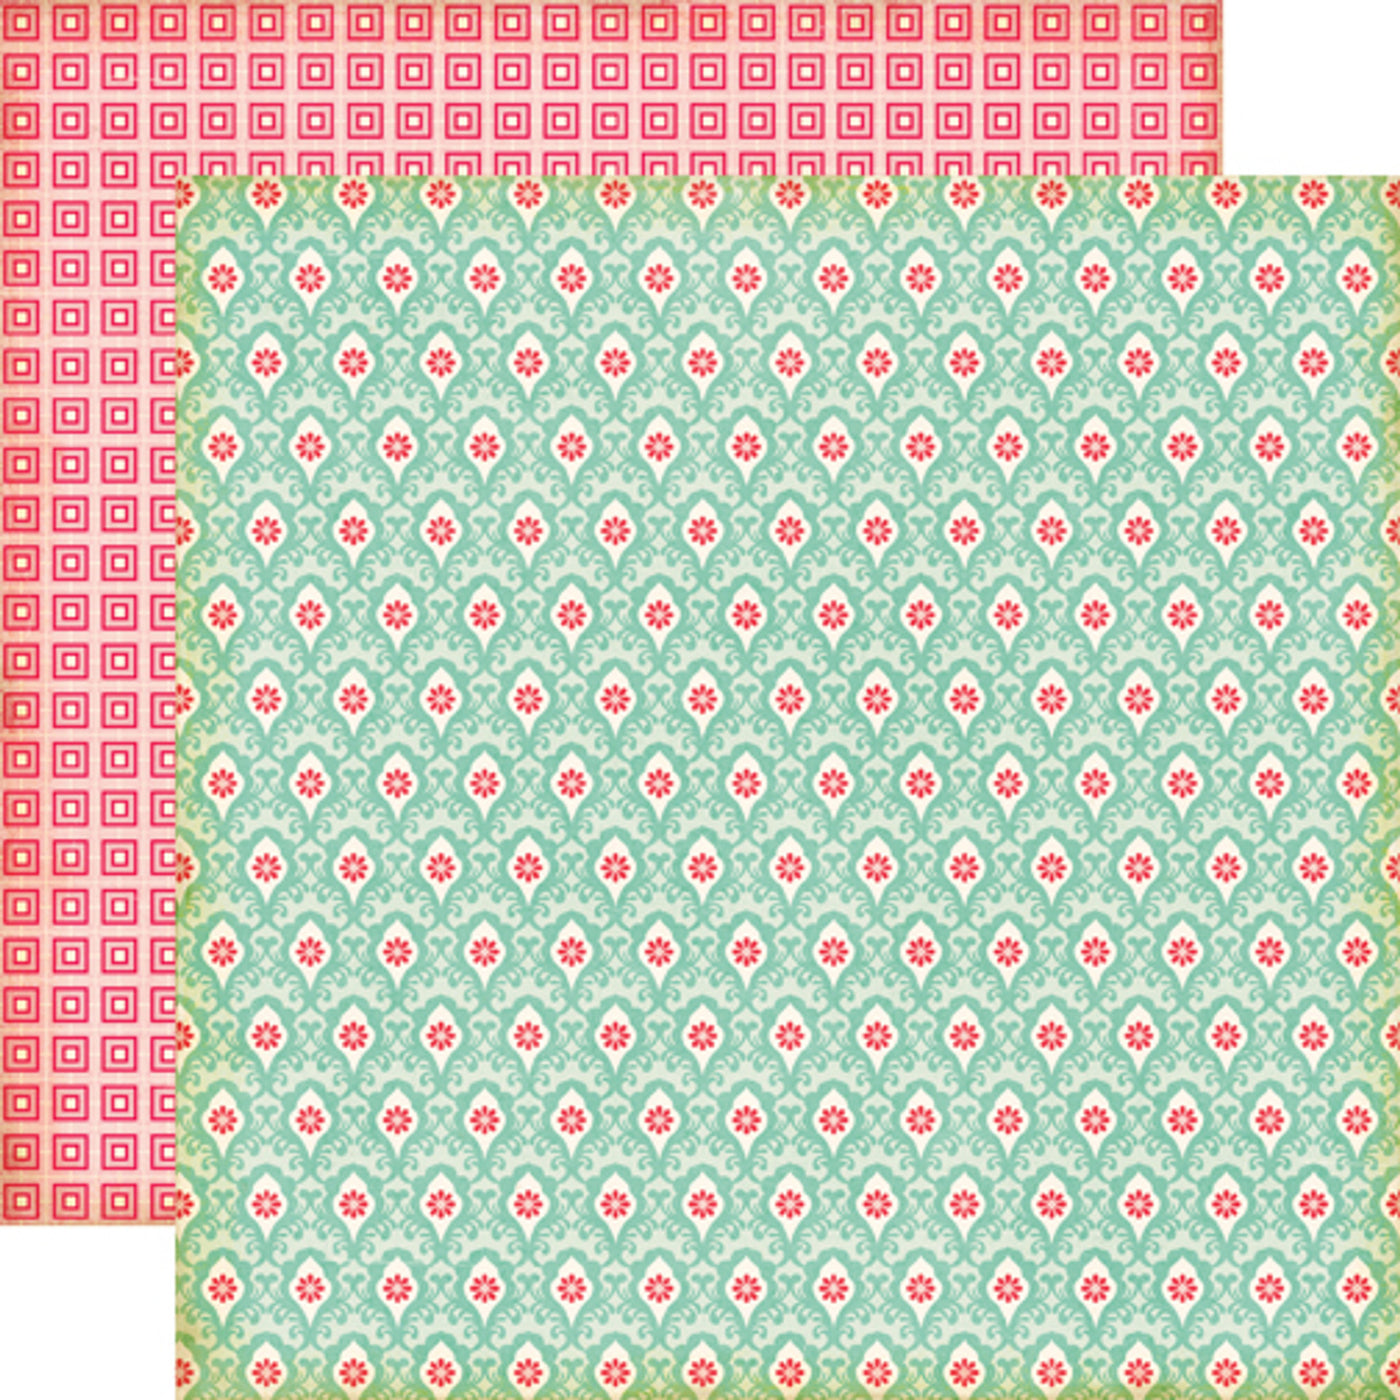 12x12 double-sided patterned paper - (pink and turquoise lace damask with a pink square pattern background reverse) - Echo Park Paper.